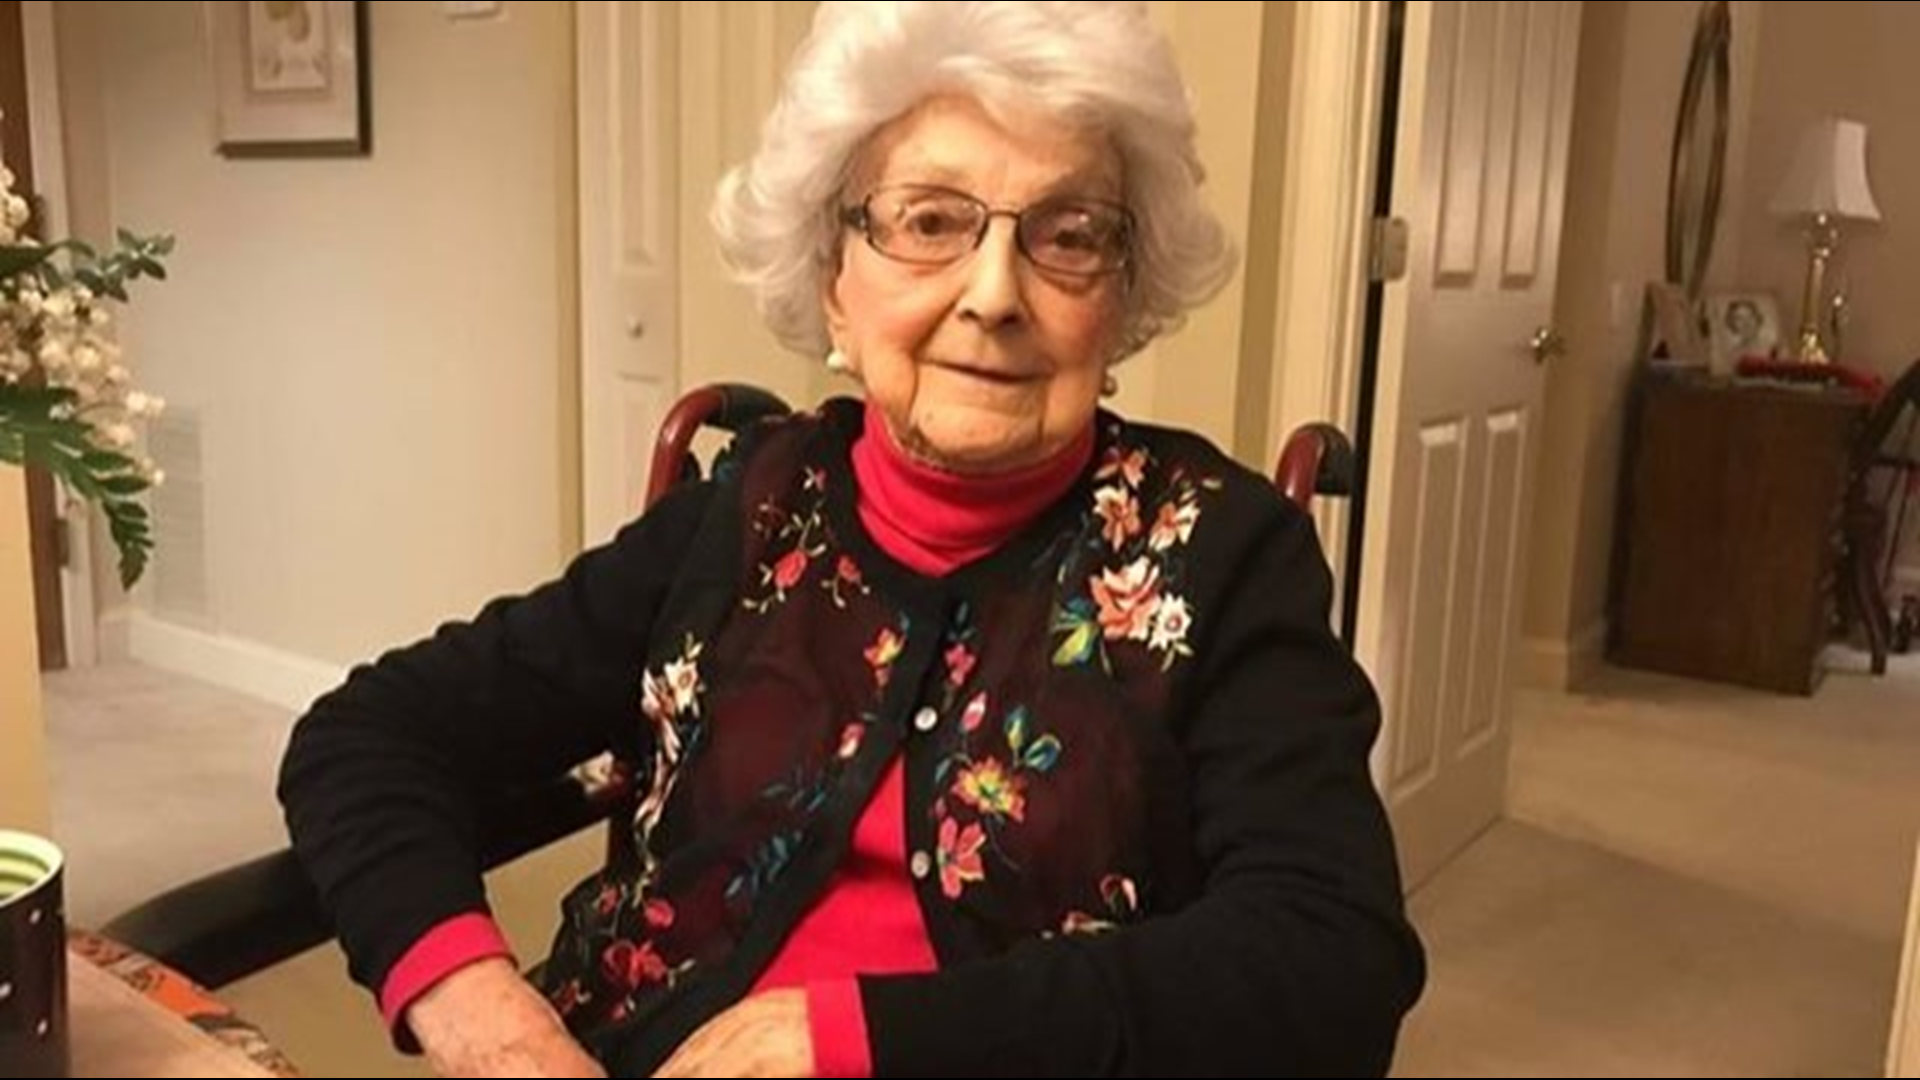 Charlotte woman turning 109 years old says she still drinks a glass of wine on Fridays